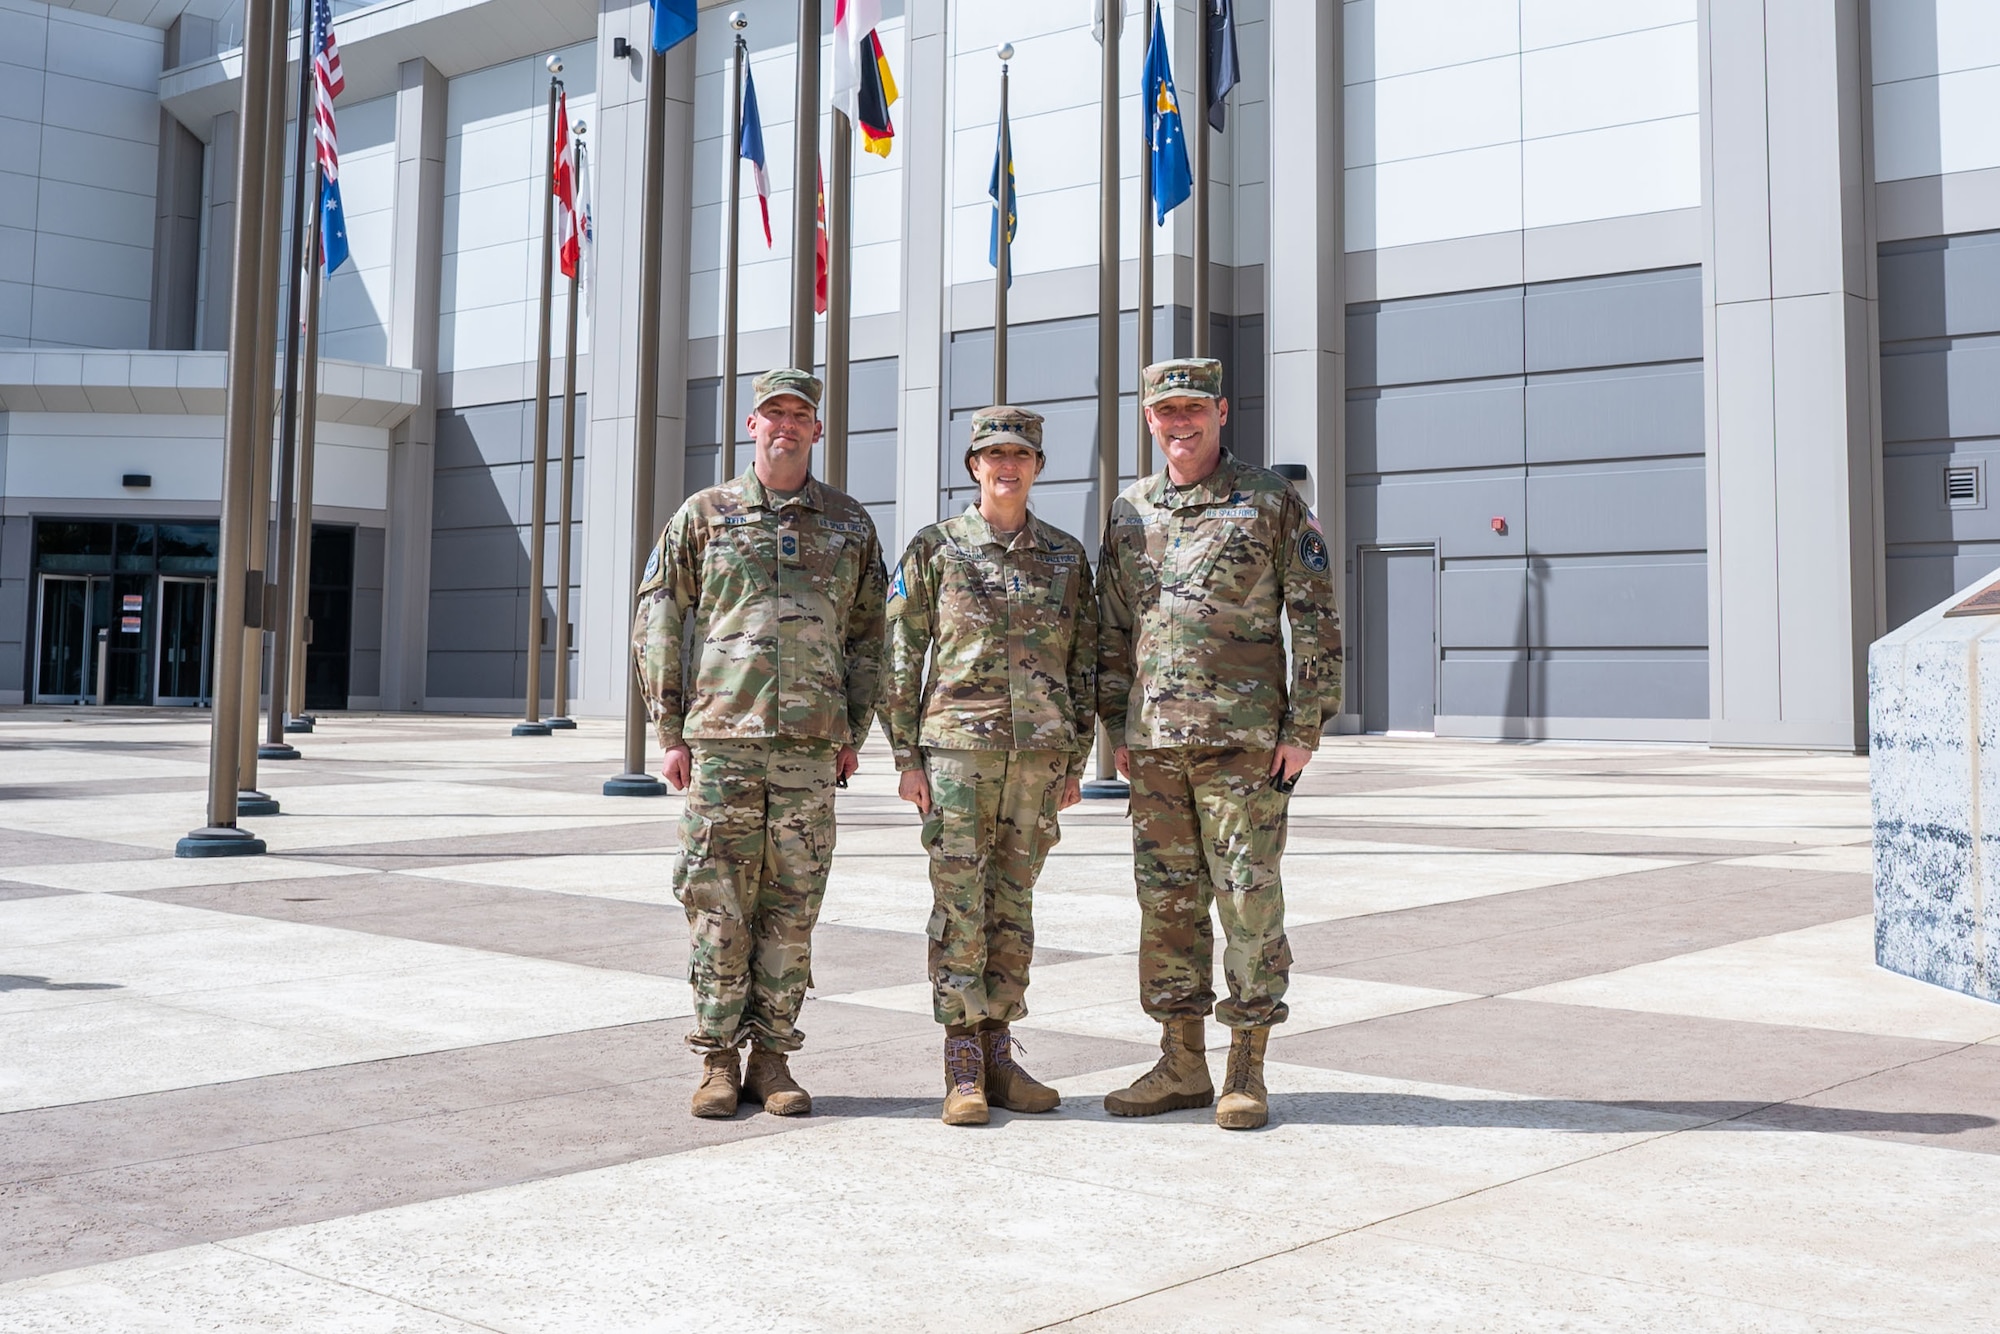 U.S. Space Force Lt. Gen. Nina M. Armagno (center), U.S. Space Force Director of Staff, poses for a photo with U.S. Space Force Maj. Gen. Douglas A. Schiess (right), Combined Force Space Component Command commander, and U.S. Space Force Chief Master Sgt. Grange S. Coffin (left), CFSCC senior enlisted leader, during a visit to Vandenberg Space Force Base, CA, Feb. 23, 2023. During her visit to the CFSCC headquarters, Armagno met with CFSCC members and toured the Combined Space Operations Center. (U.S. Space Force photo by Tech. Sgt. Luke Kitterman)